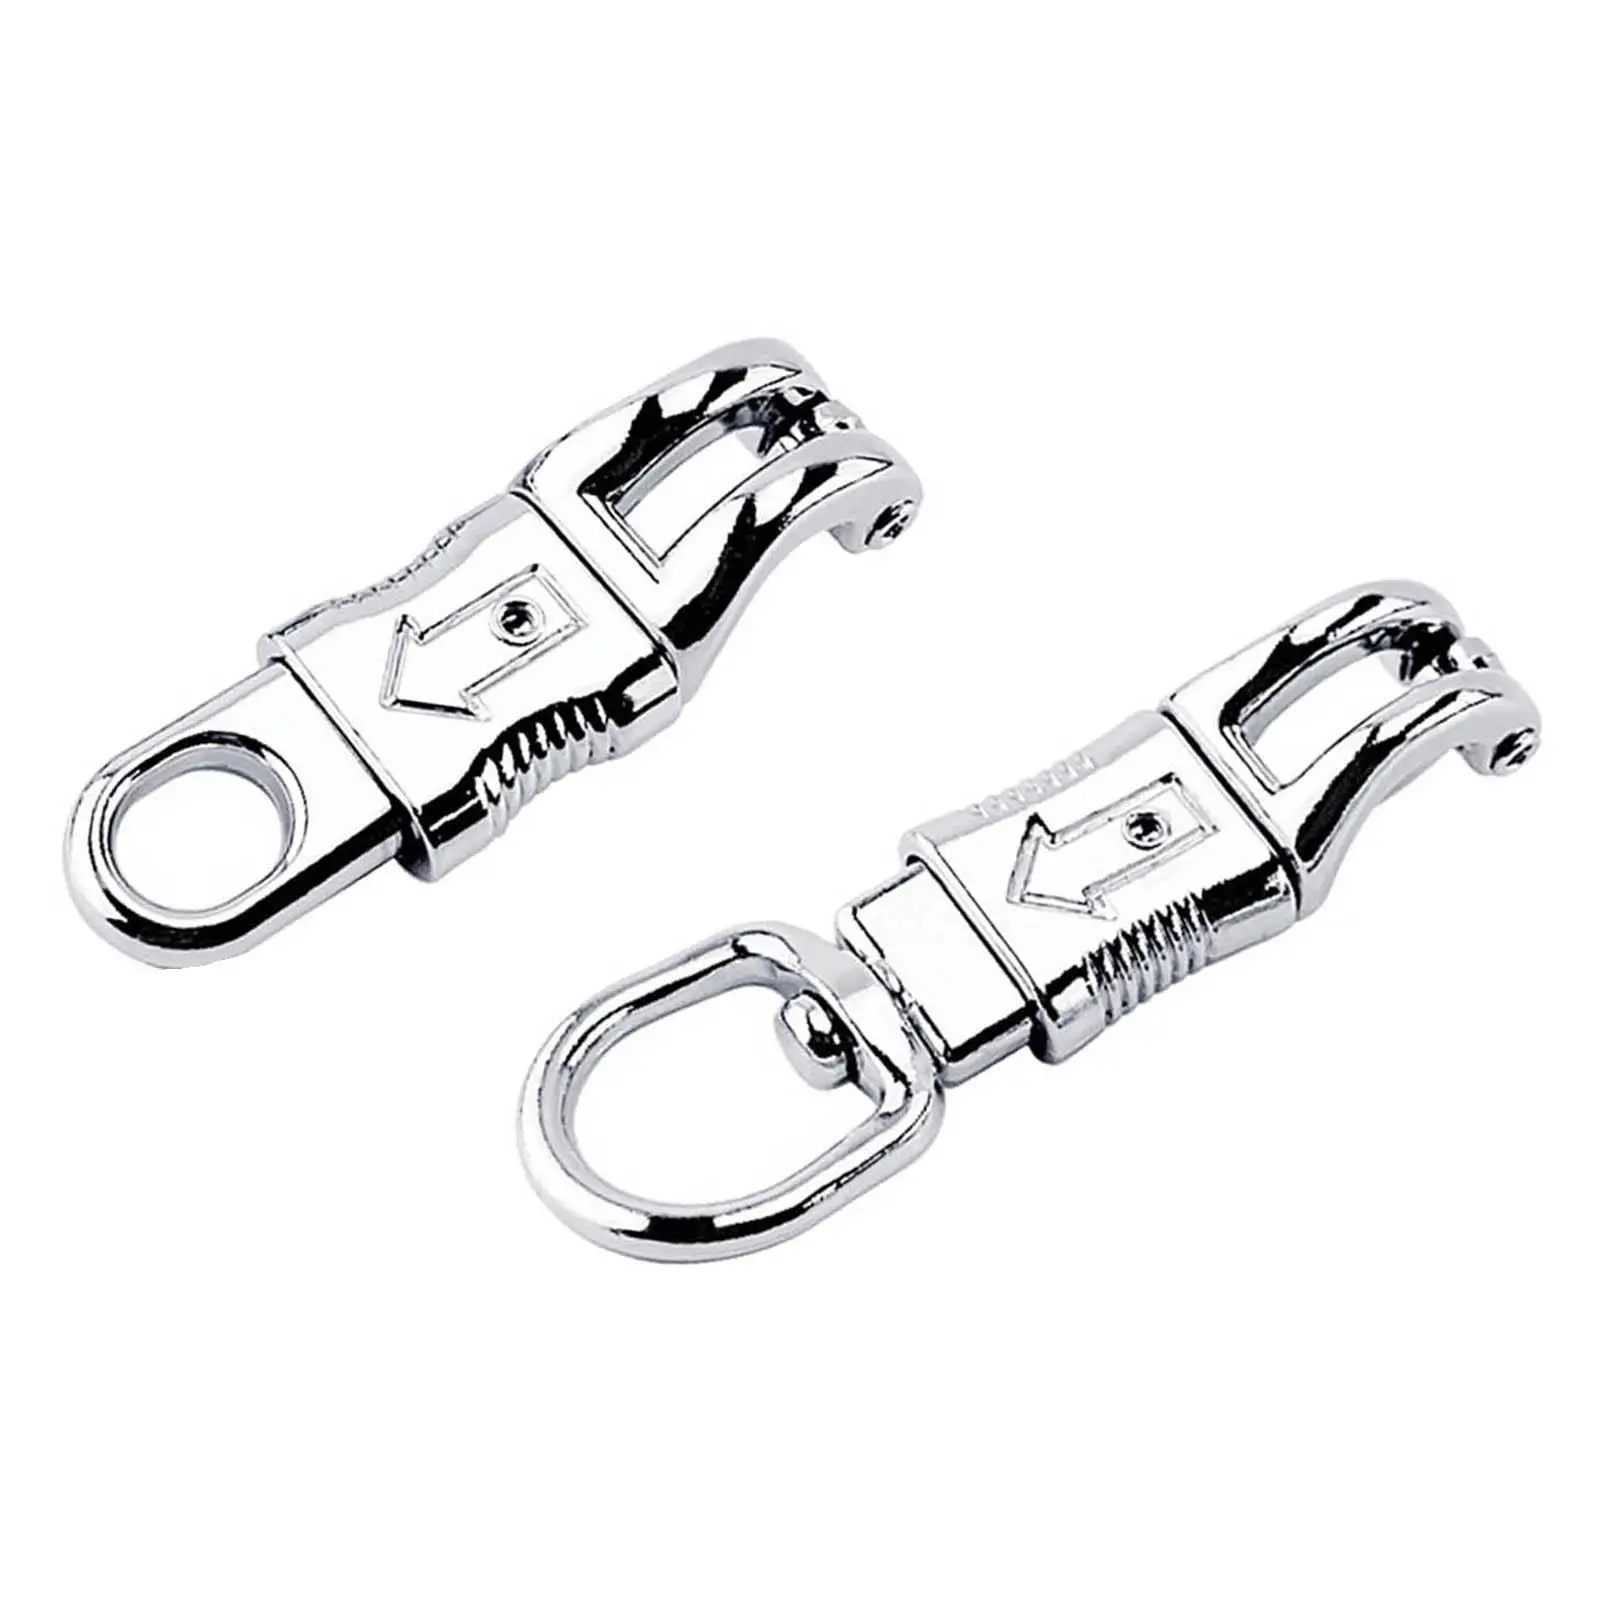 Zinc Alloy Panic Snap for Paracord Quick Release Heavy Duty Clips Buckles Fit for Horse Riding Leads Reins Get Back whips